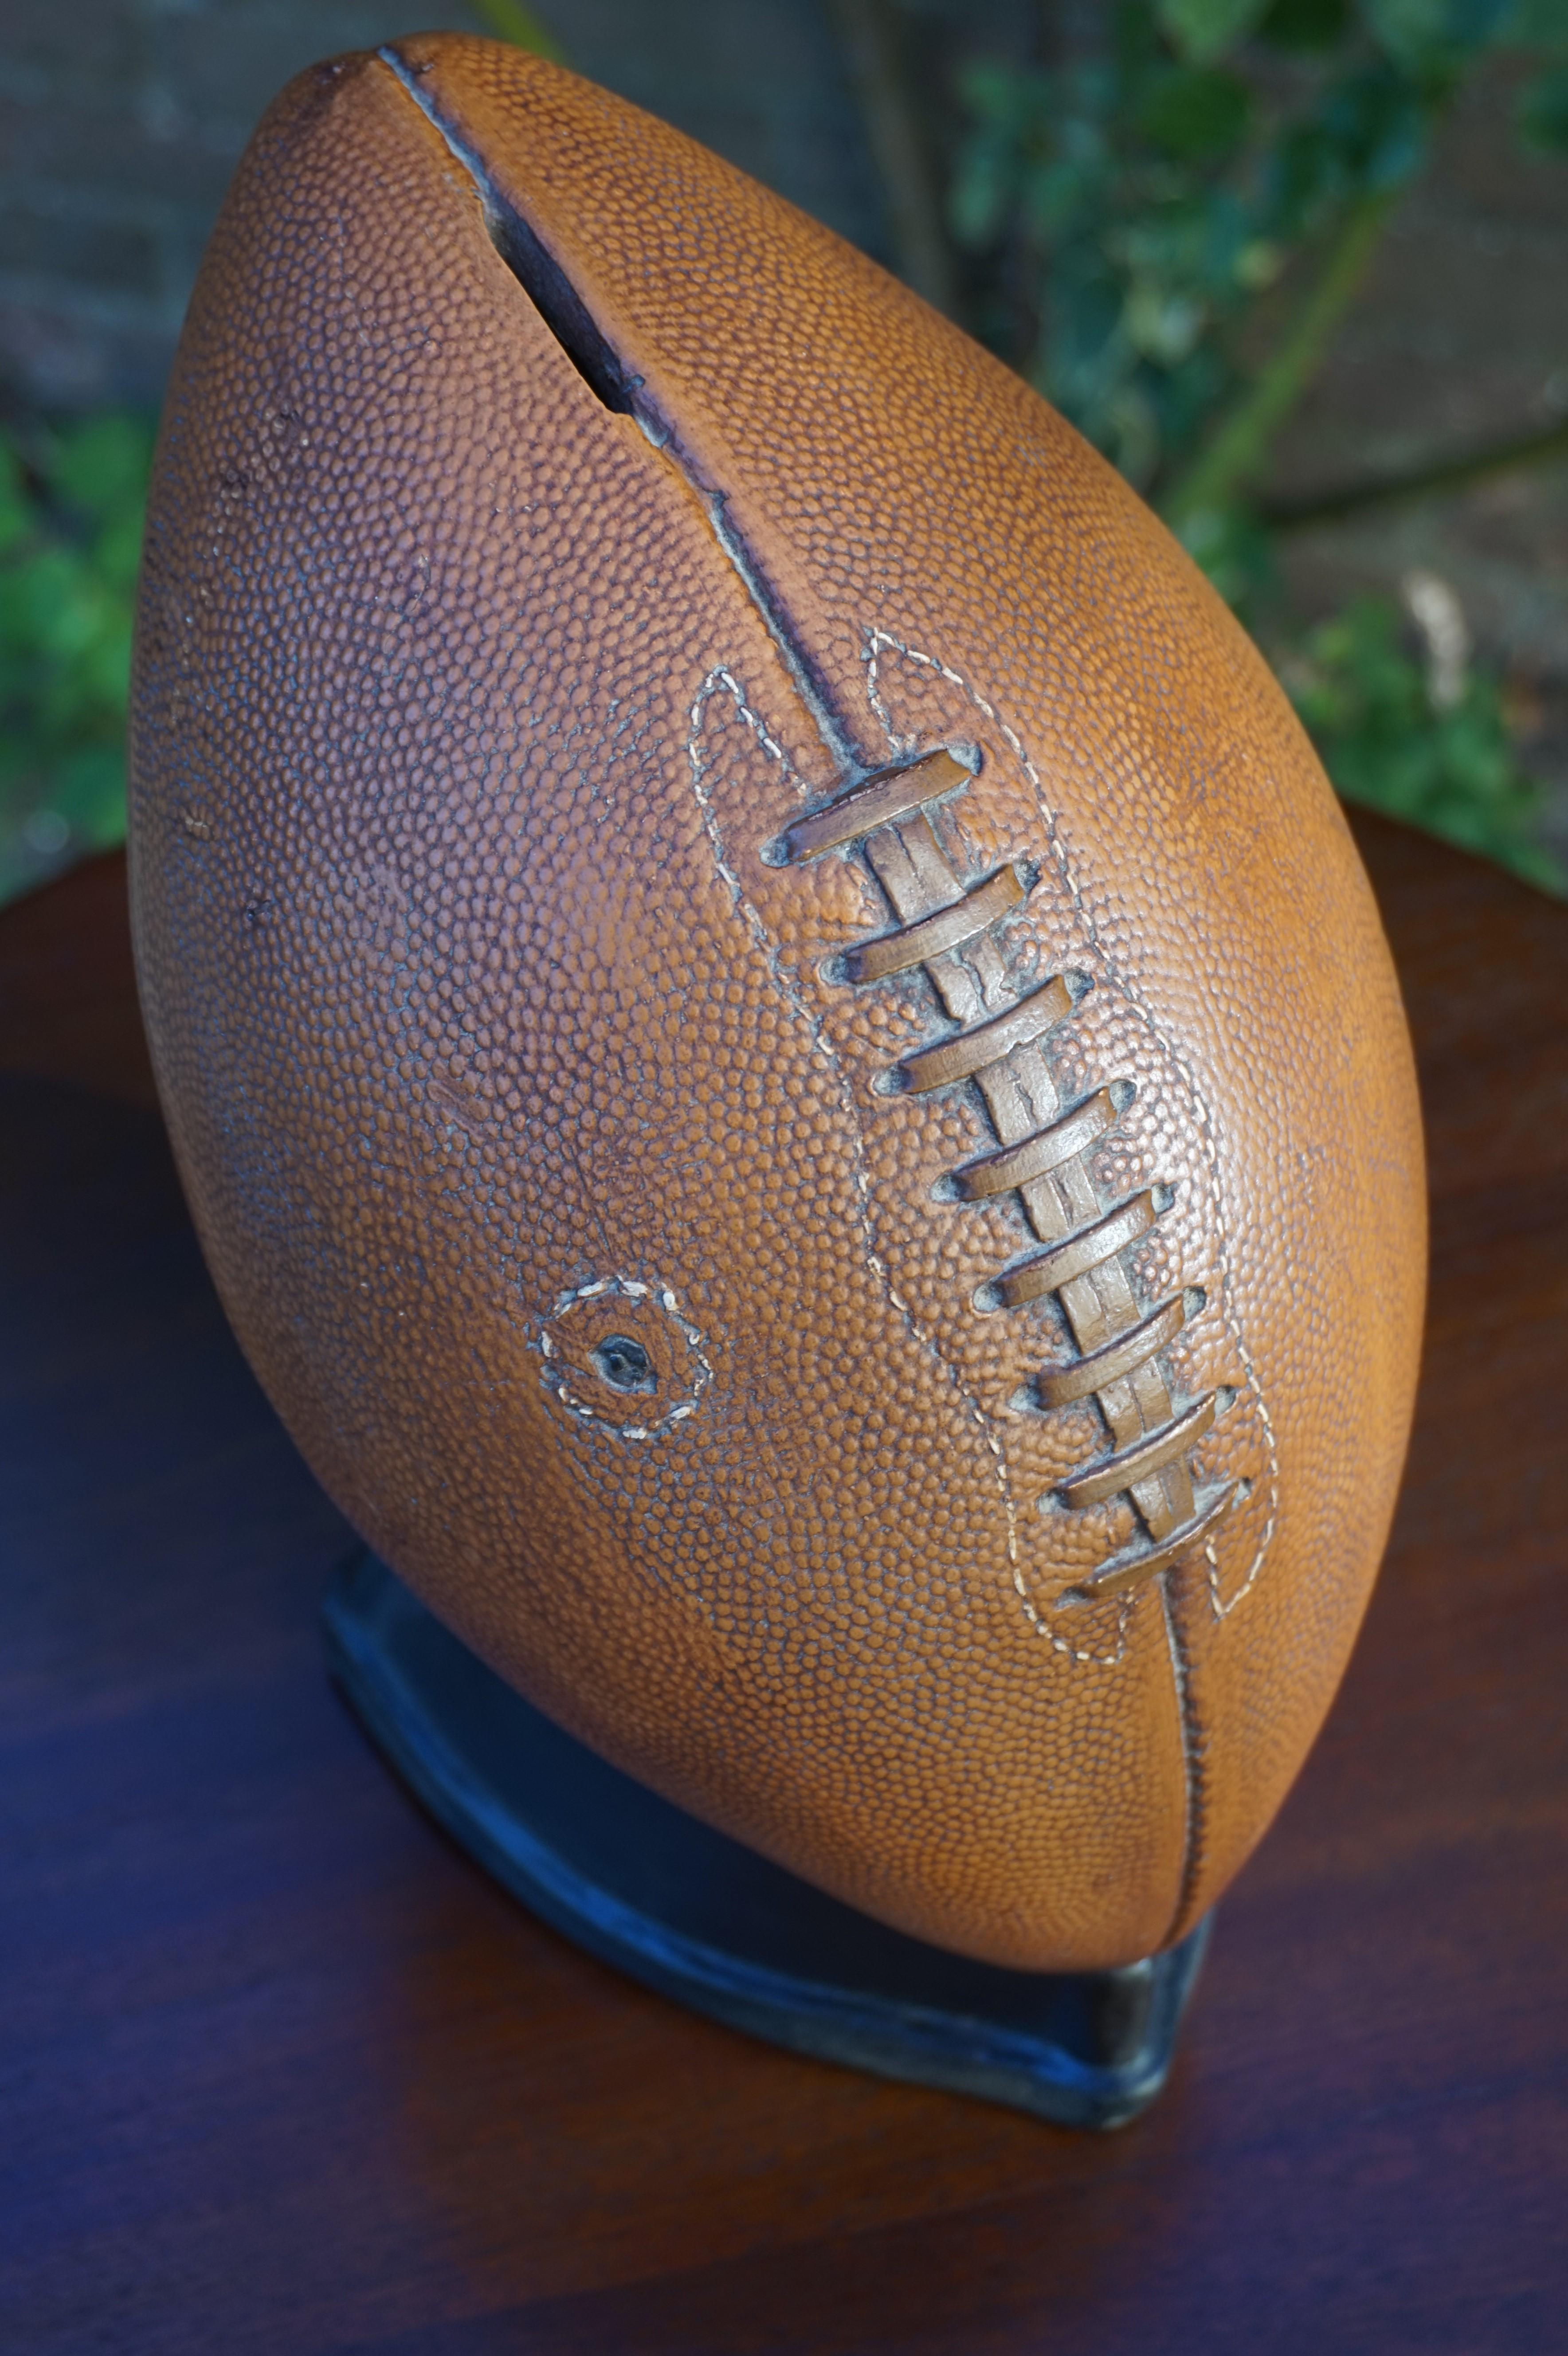 American Vintage & Very Realistic Football Money Box Moneybox of Hand-Painted Plaster